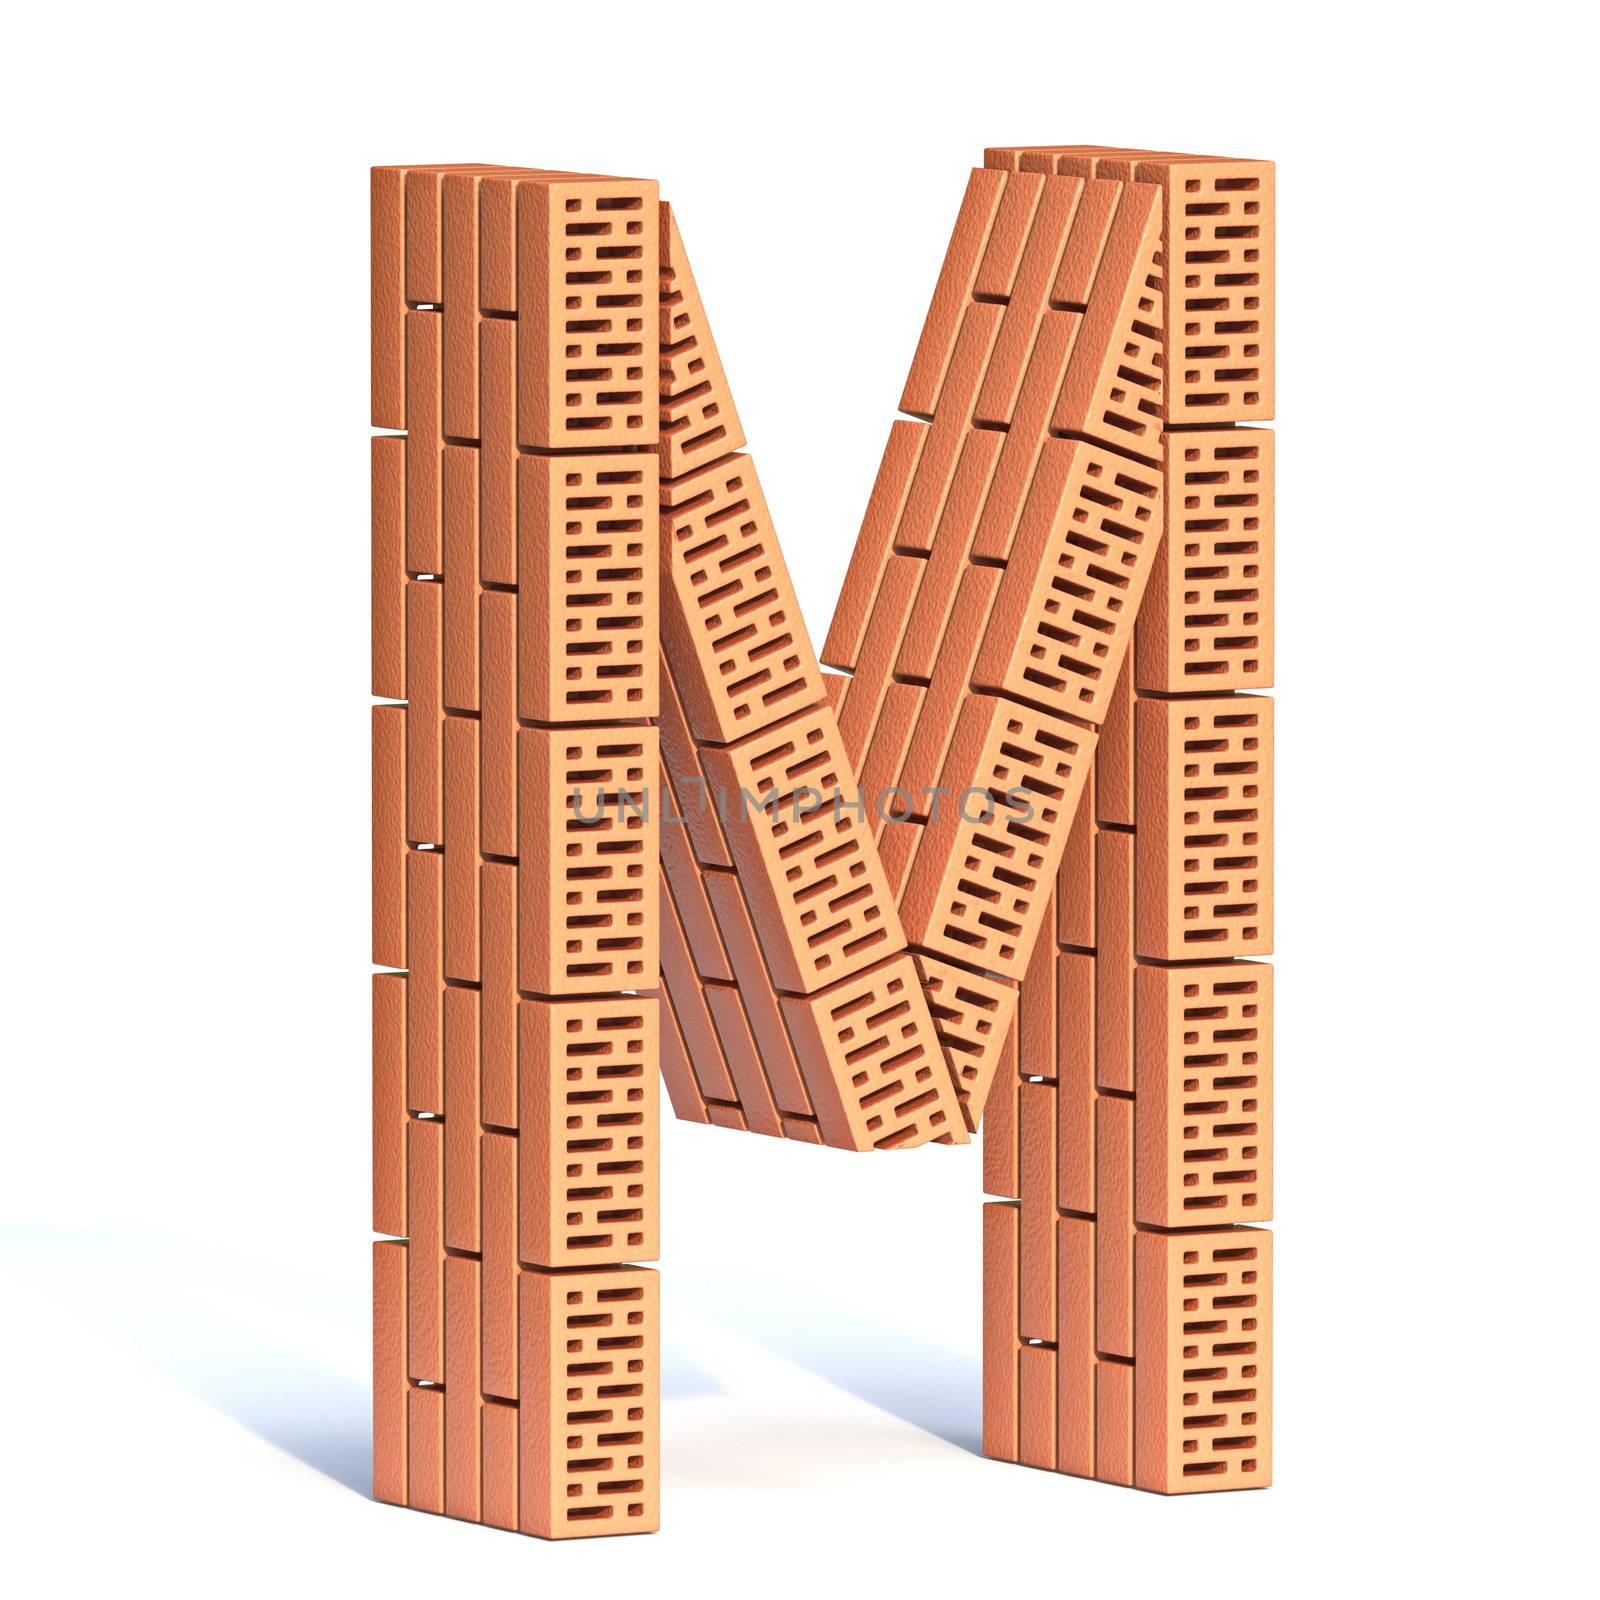 Brick wall font Letter M 3D by djmilic